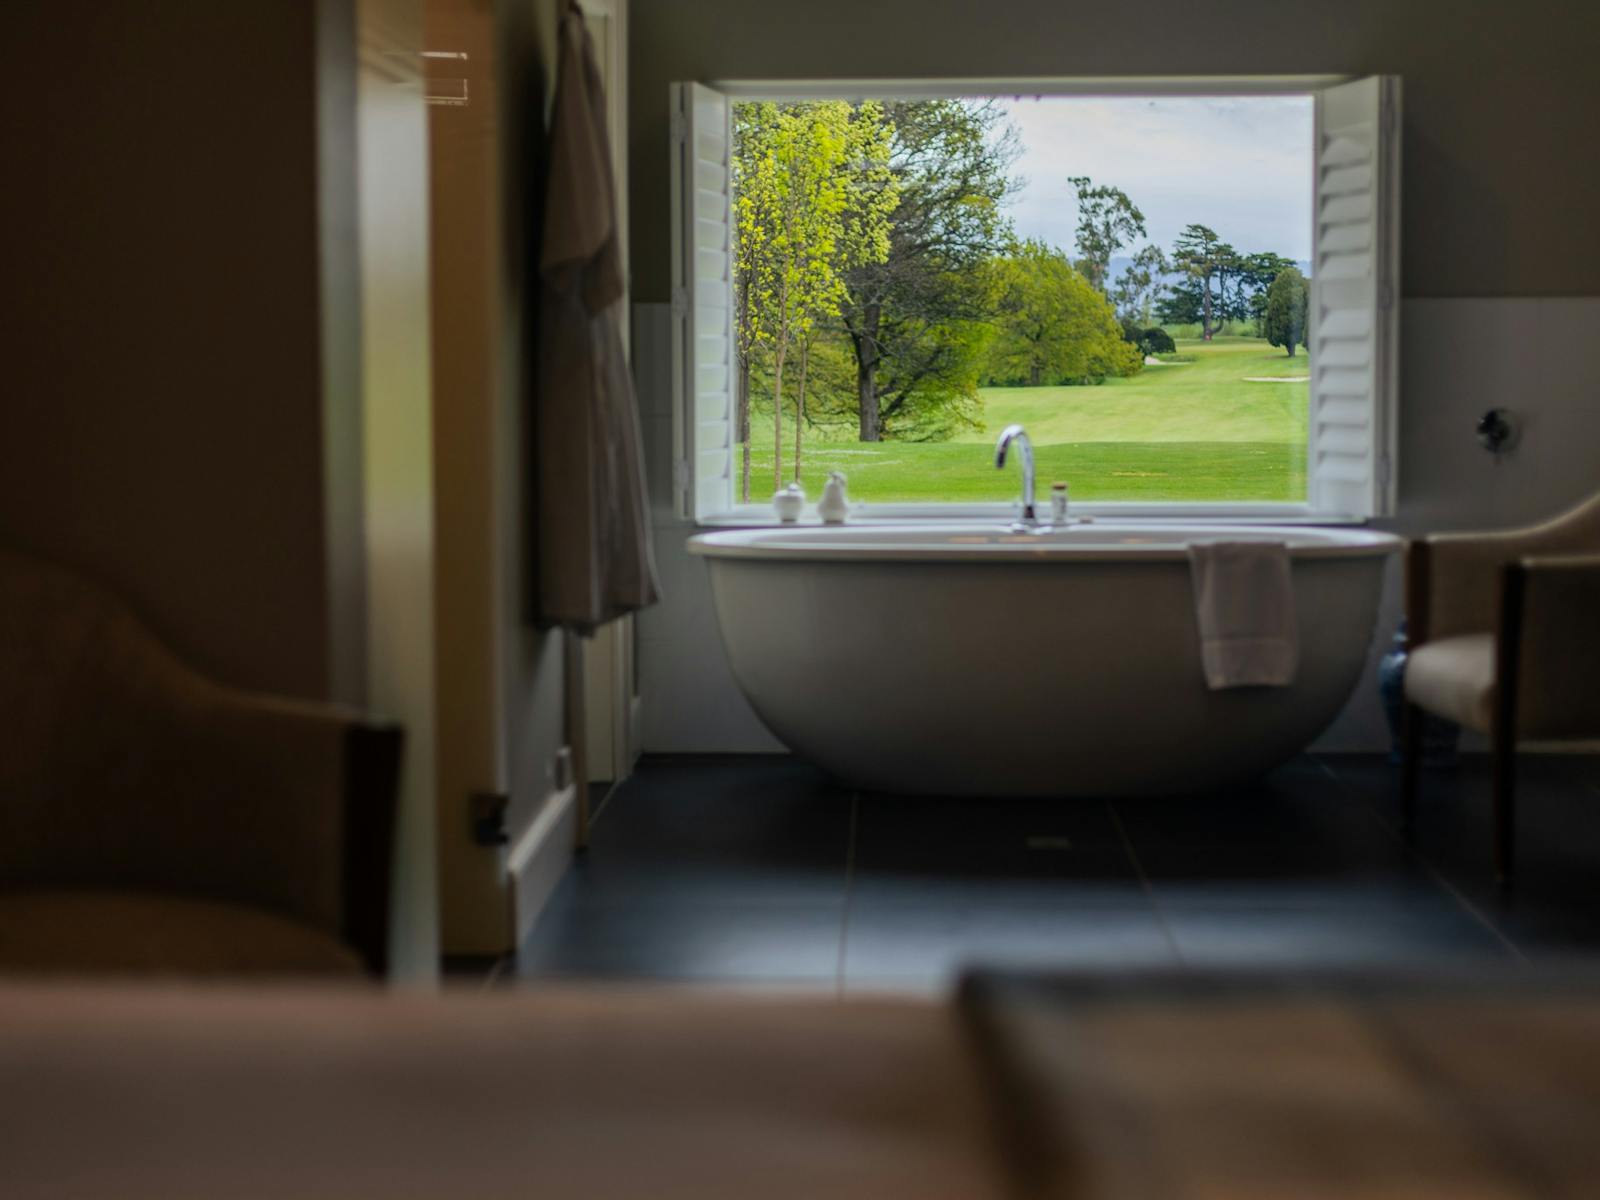 Large egg shaped bath in front of large window overlooking golf course, black tiled floor